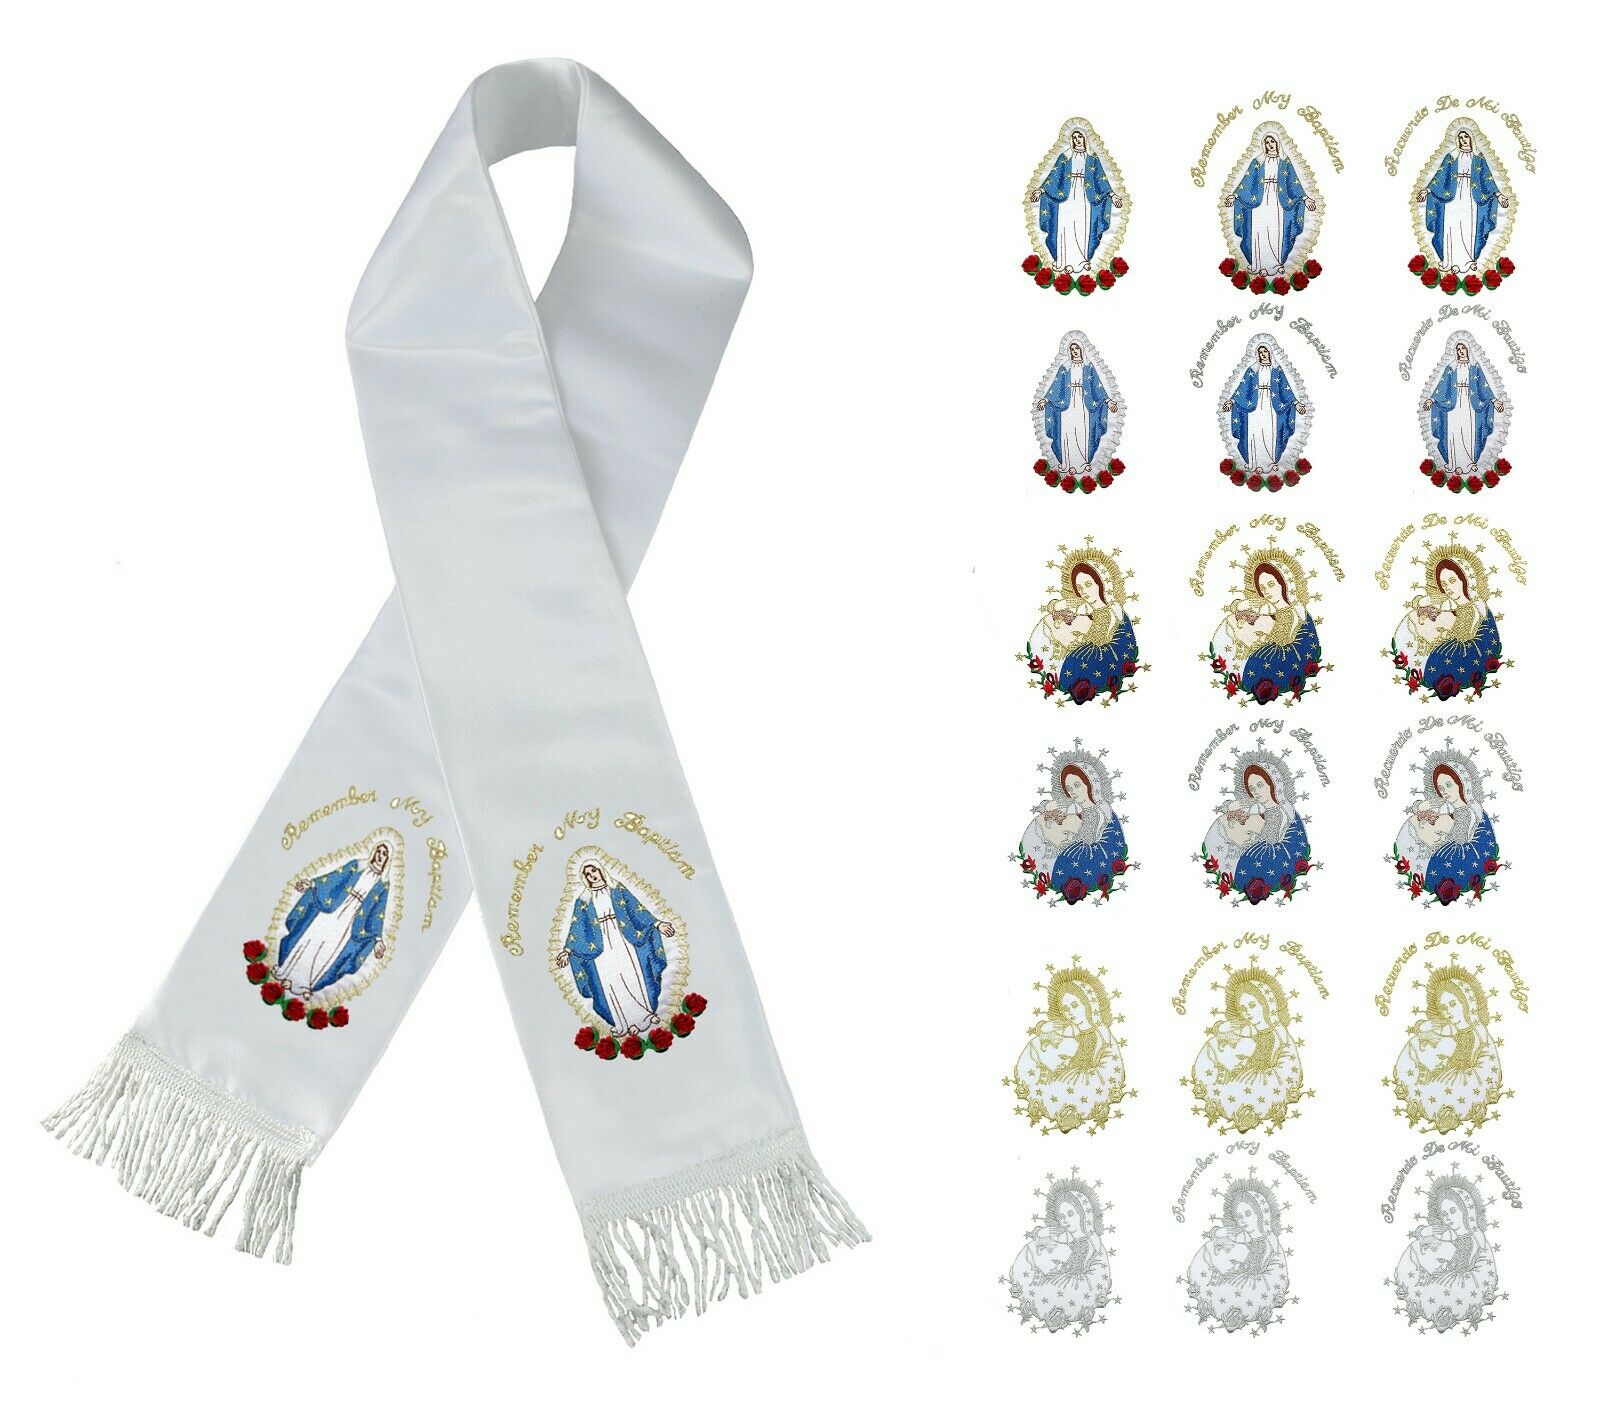 Hermosa White Christening Baptism Embroidered Stole Scarf for Baby Toddler Boy